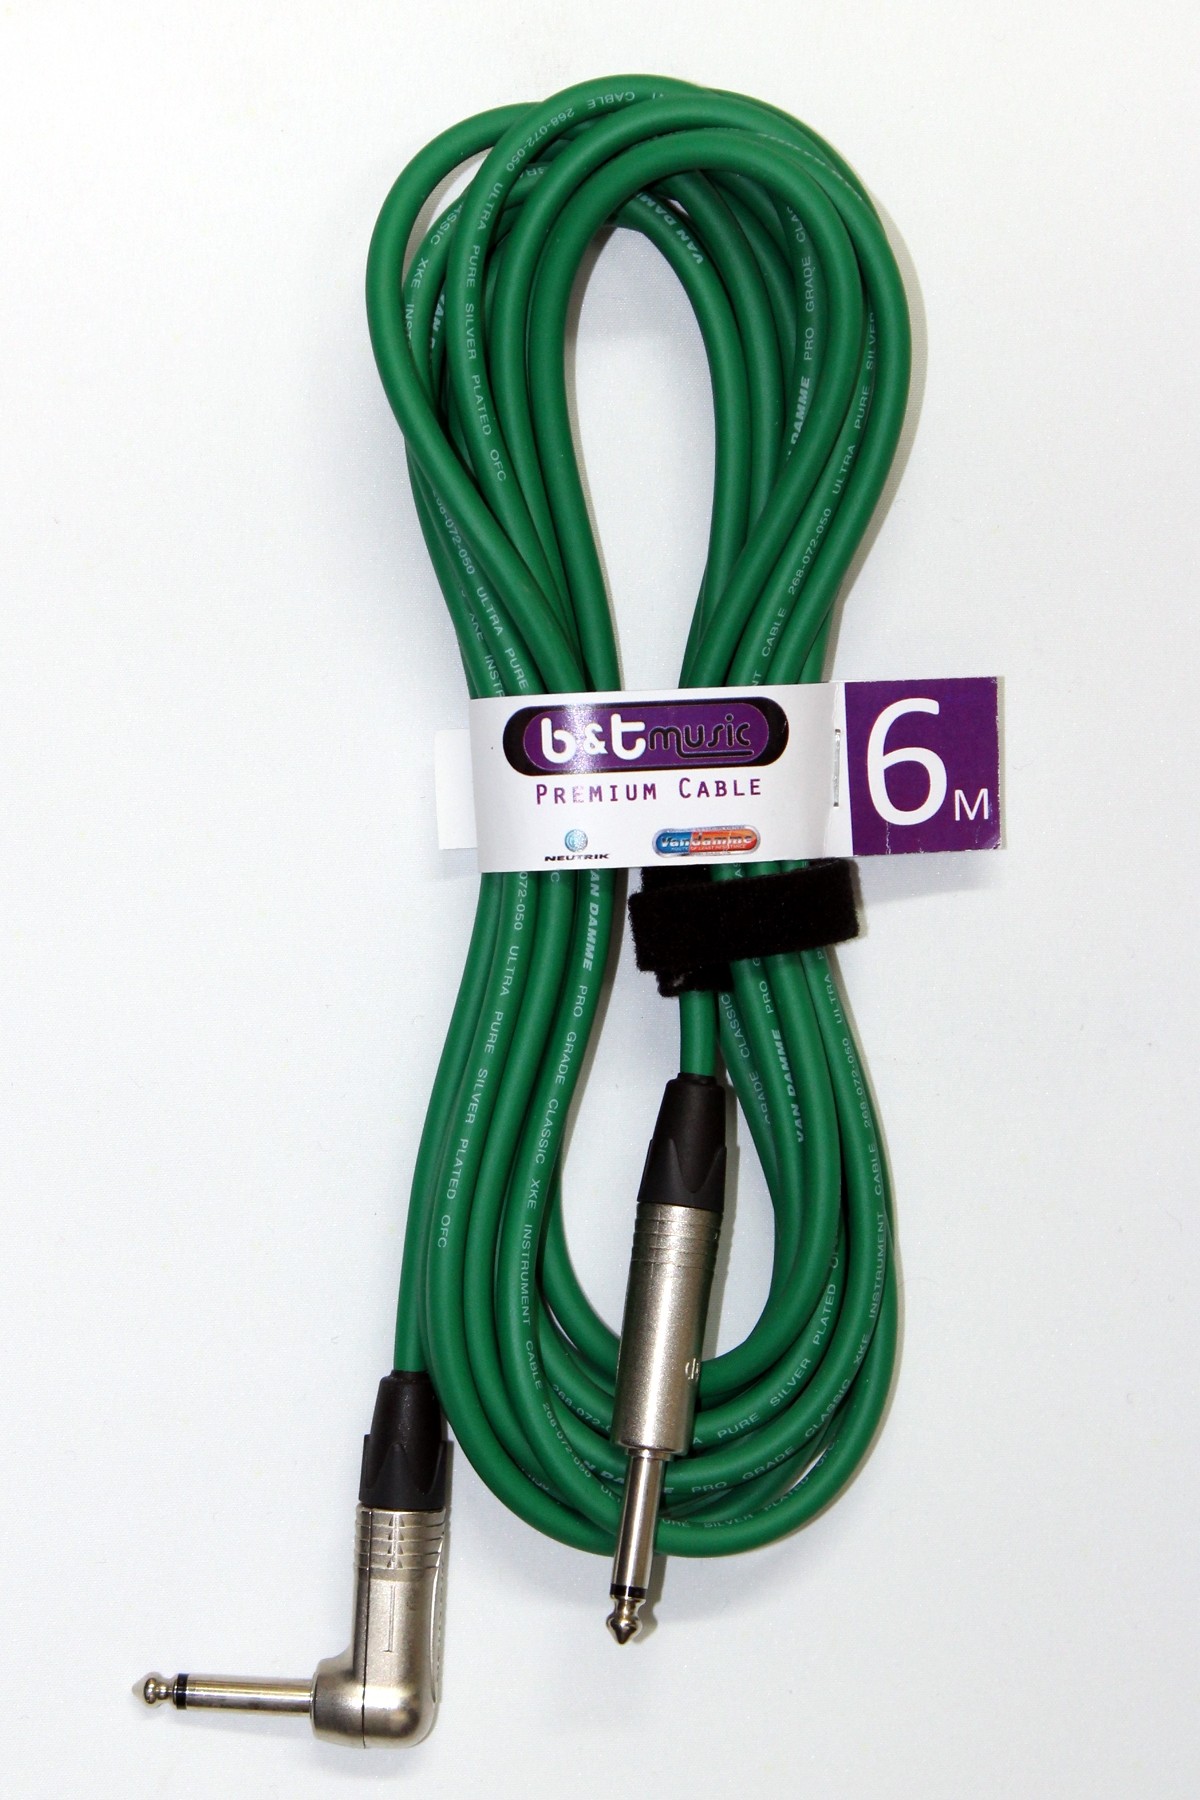 B&T Music Premium Cable 6m Jack To Angle Jack - Green